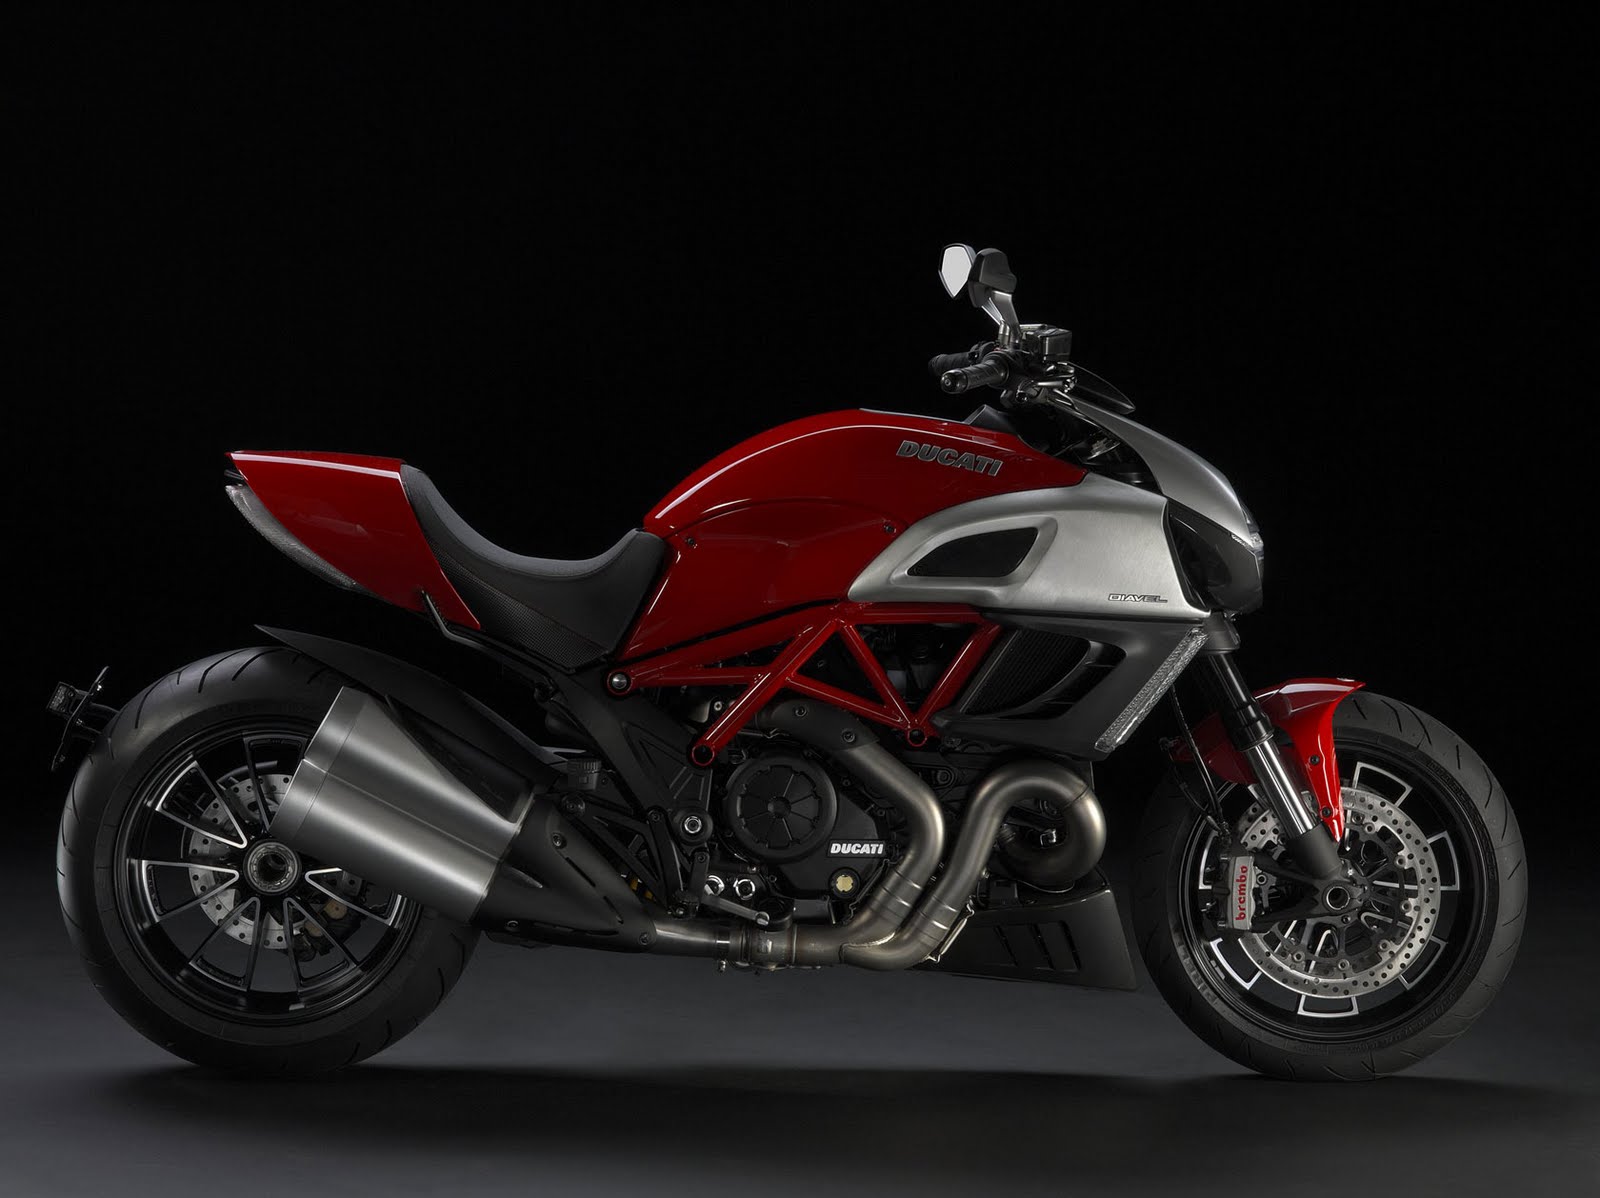 Top Motorcycle Wallpapers: 2011 Ducati Diavel Photo Gallery